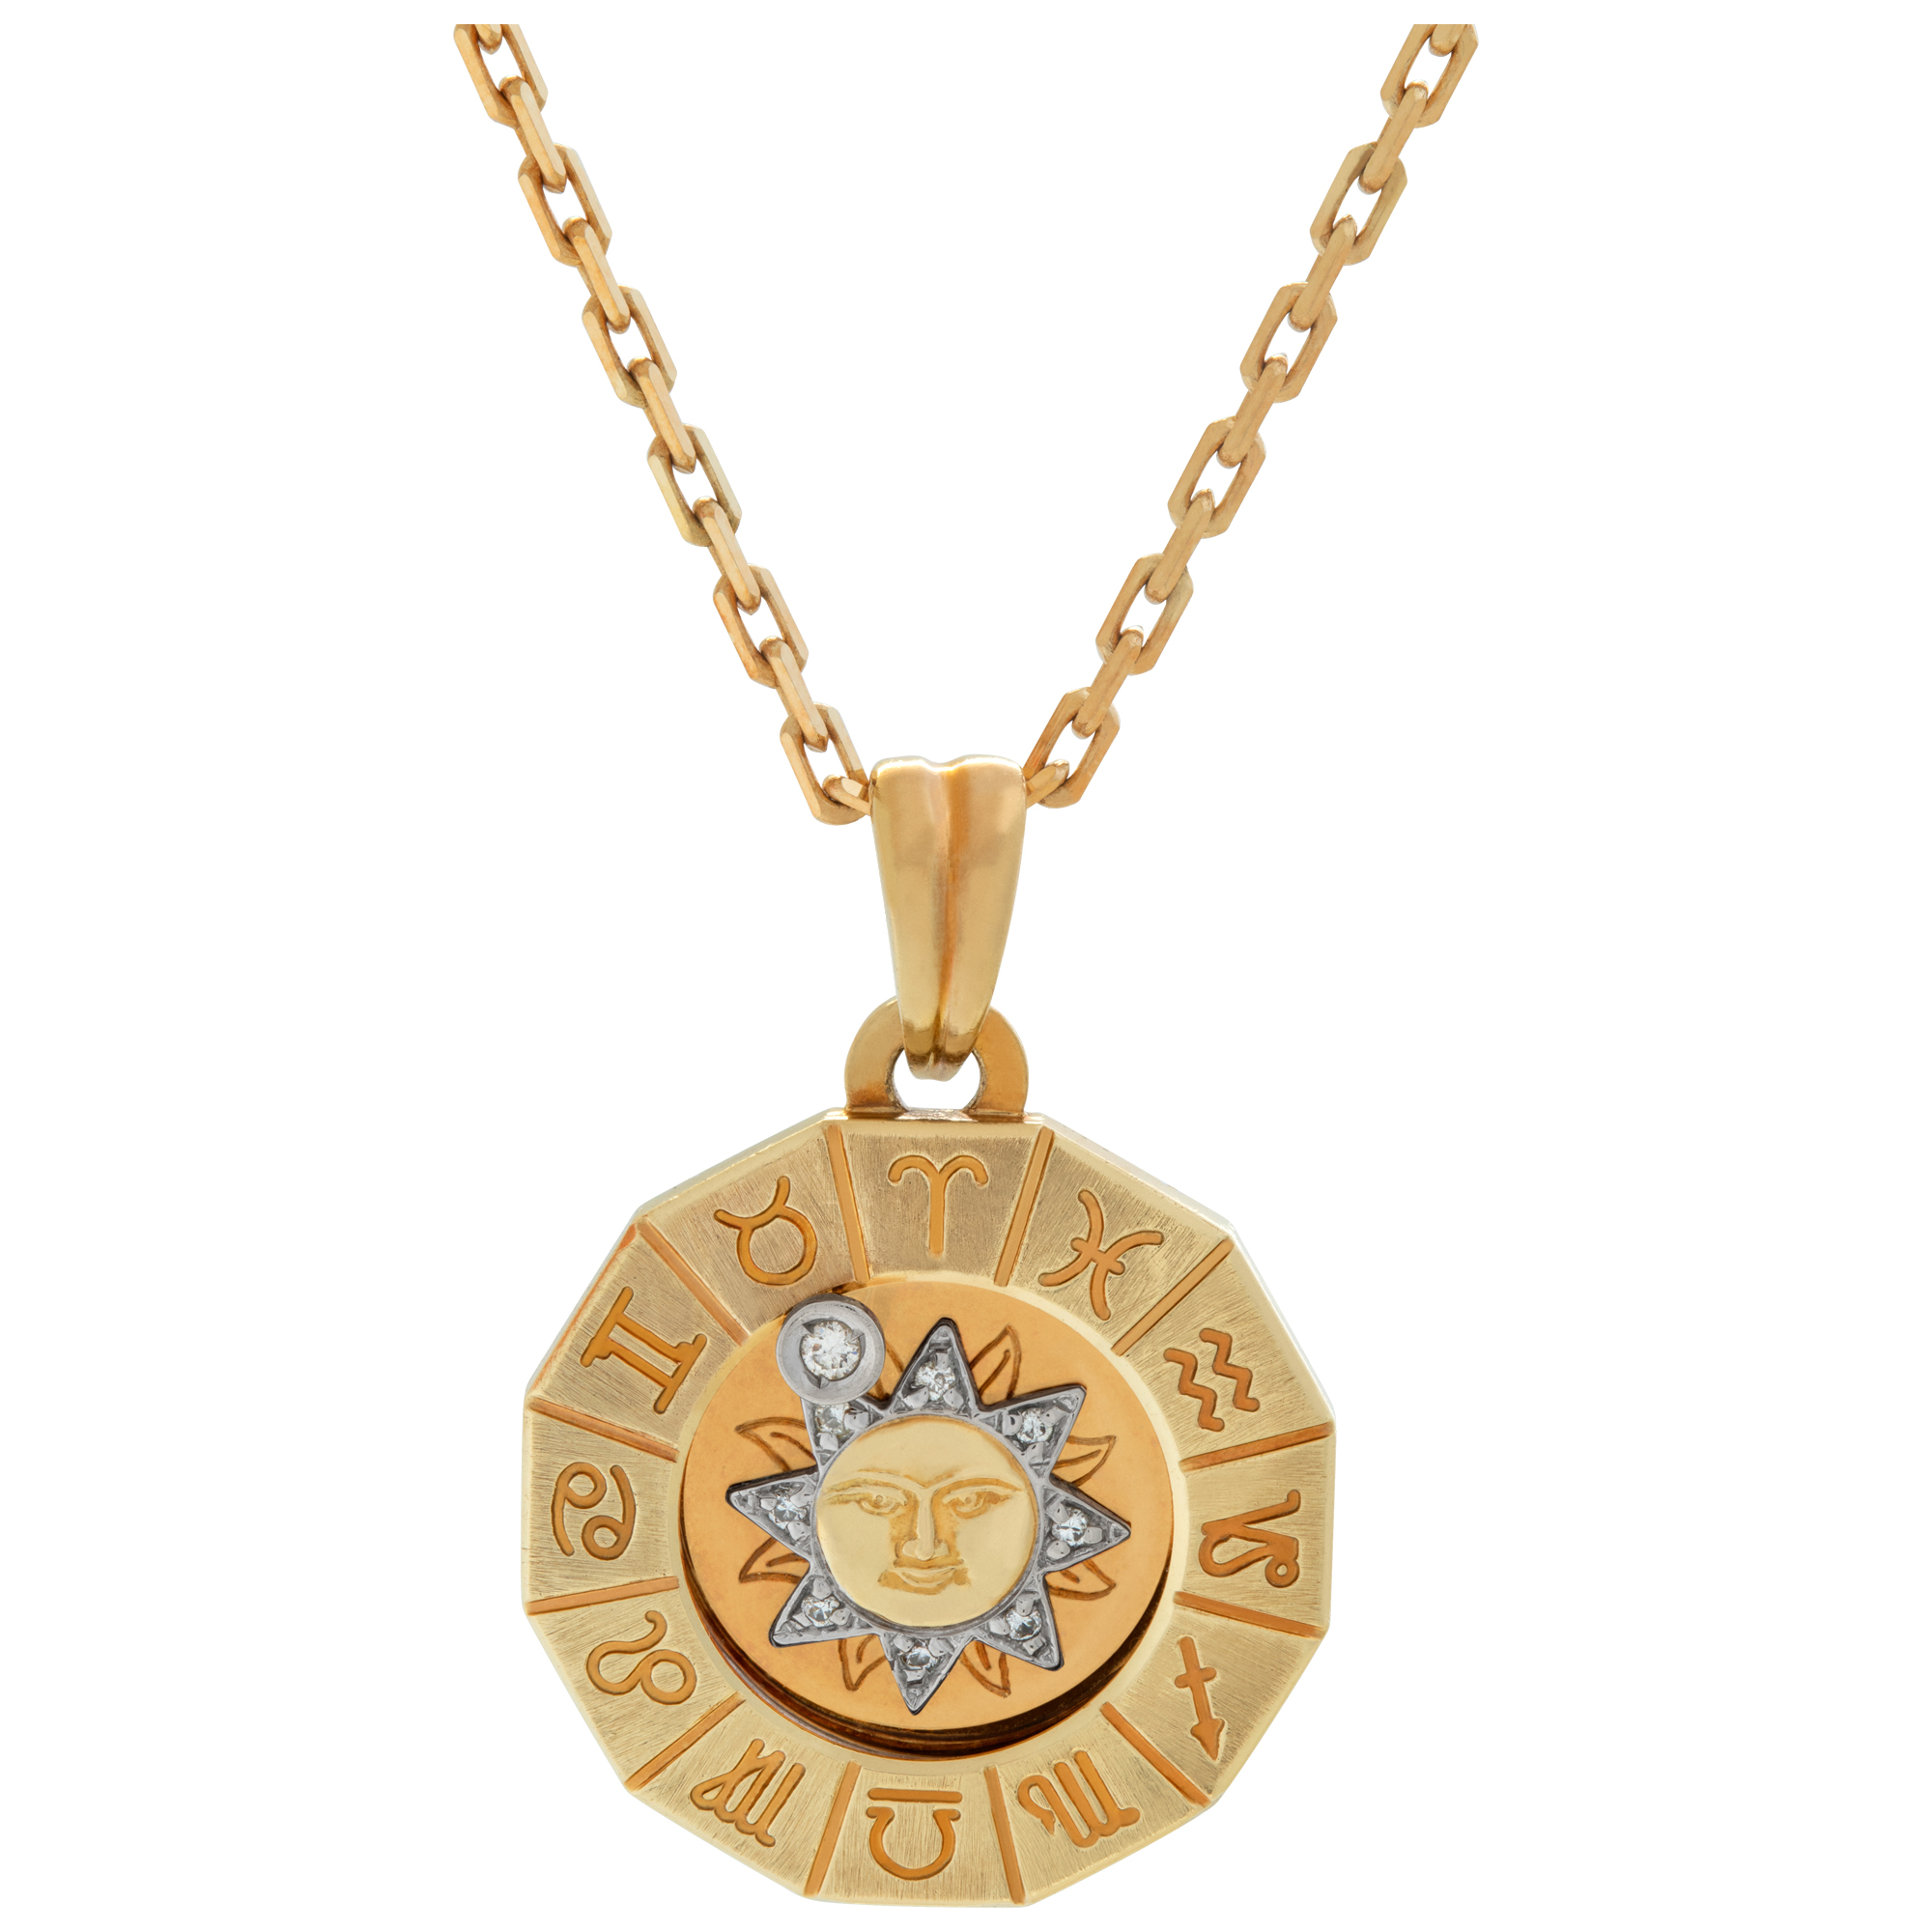 Zodiac pendant necklace in 18k yellow gold with accent diamond image 1